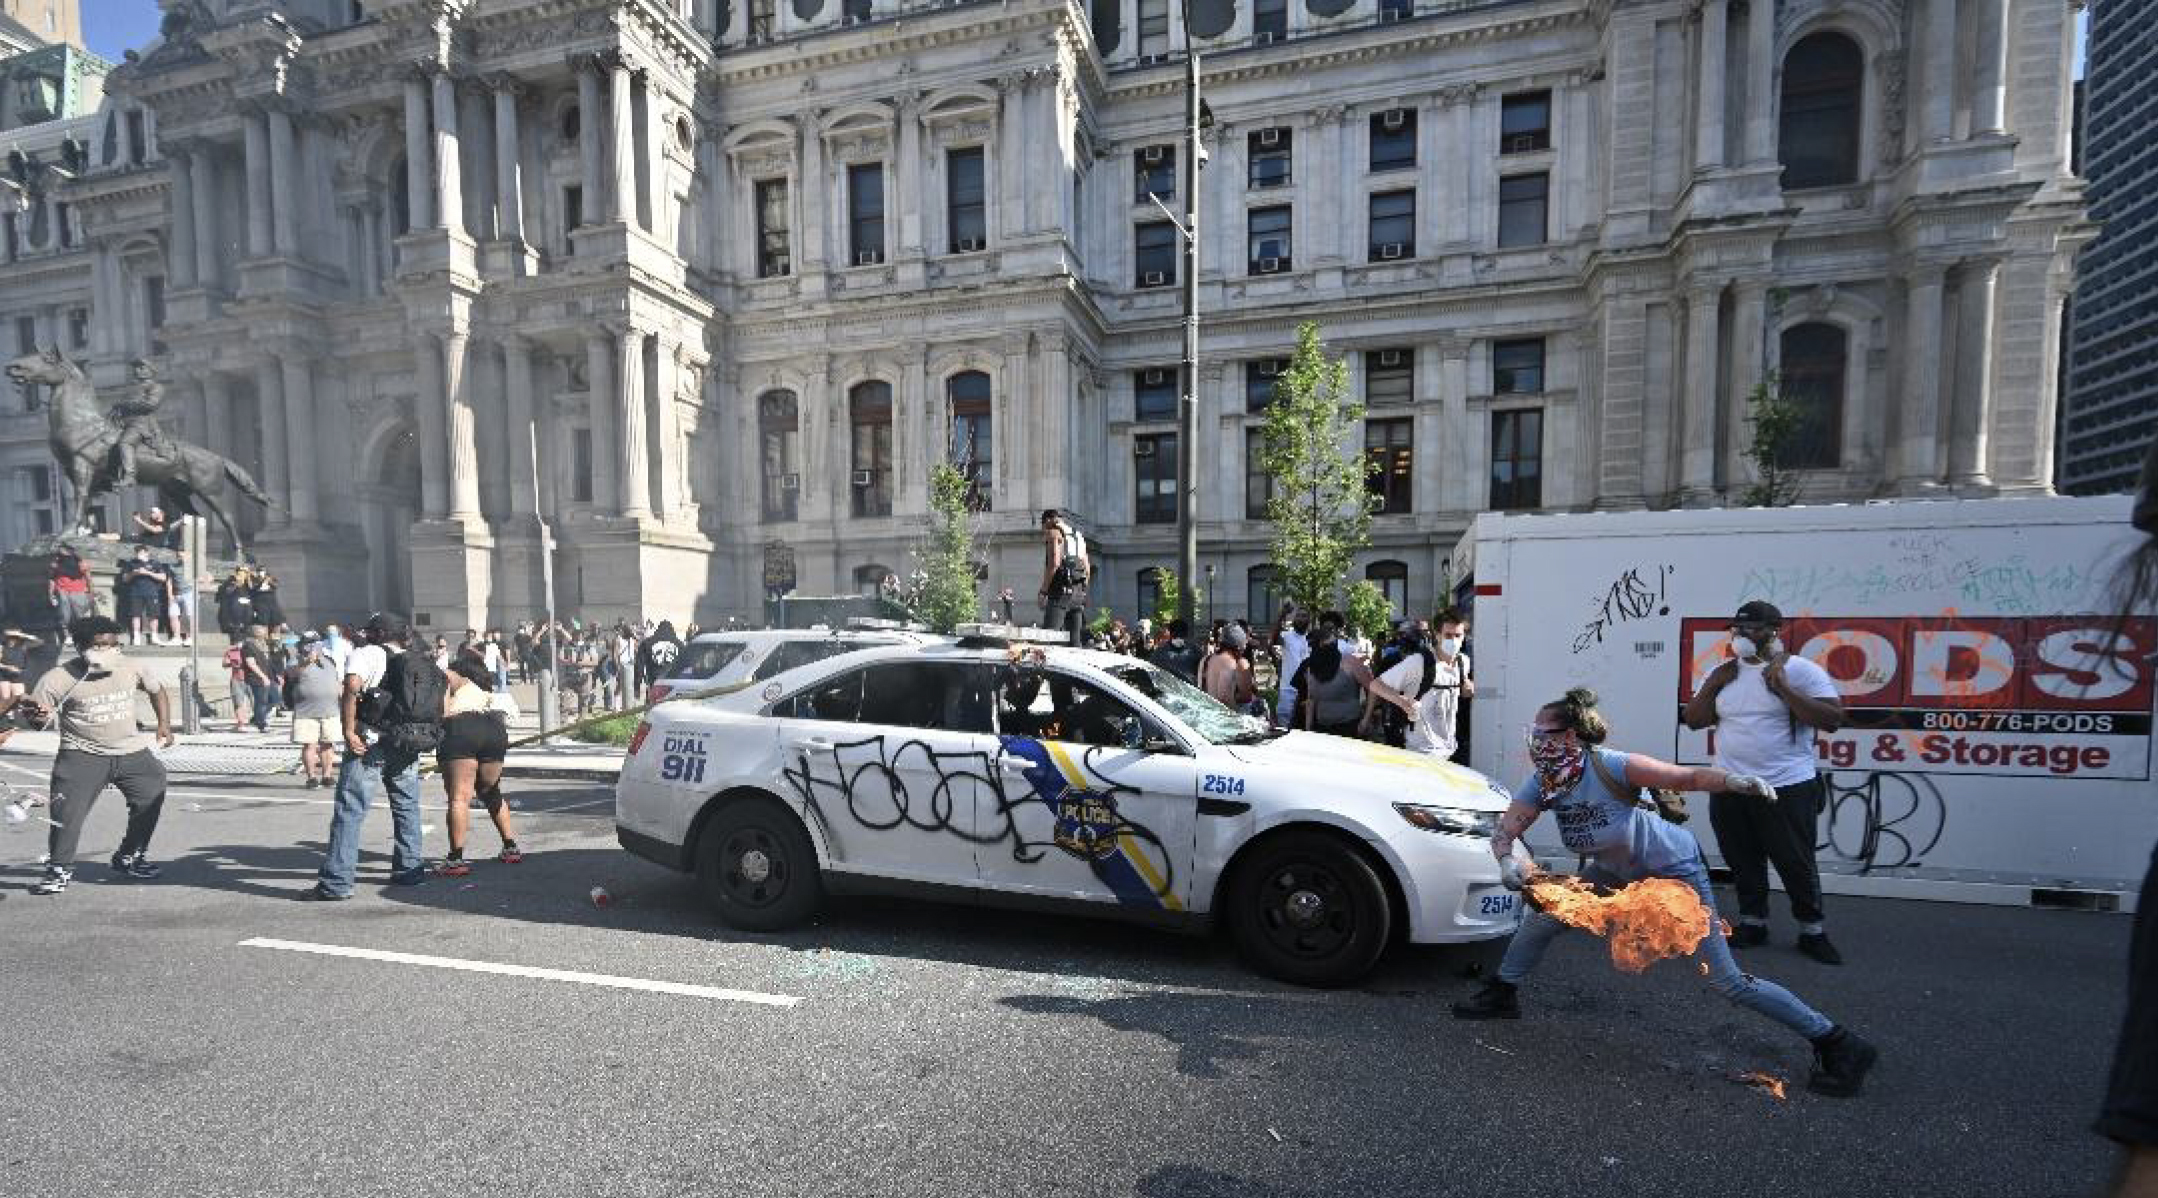 FBI tracked Philly protester through Etsy, LinkedIn to charge her with torching police cars pic